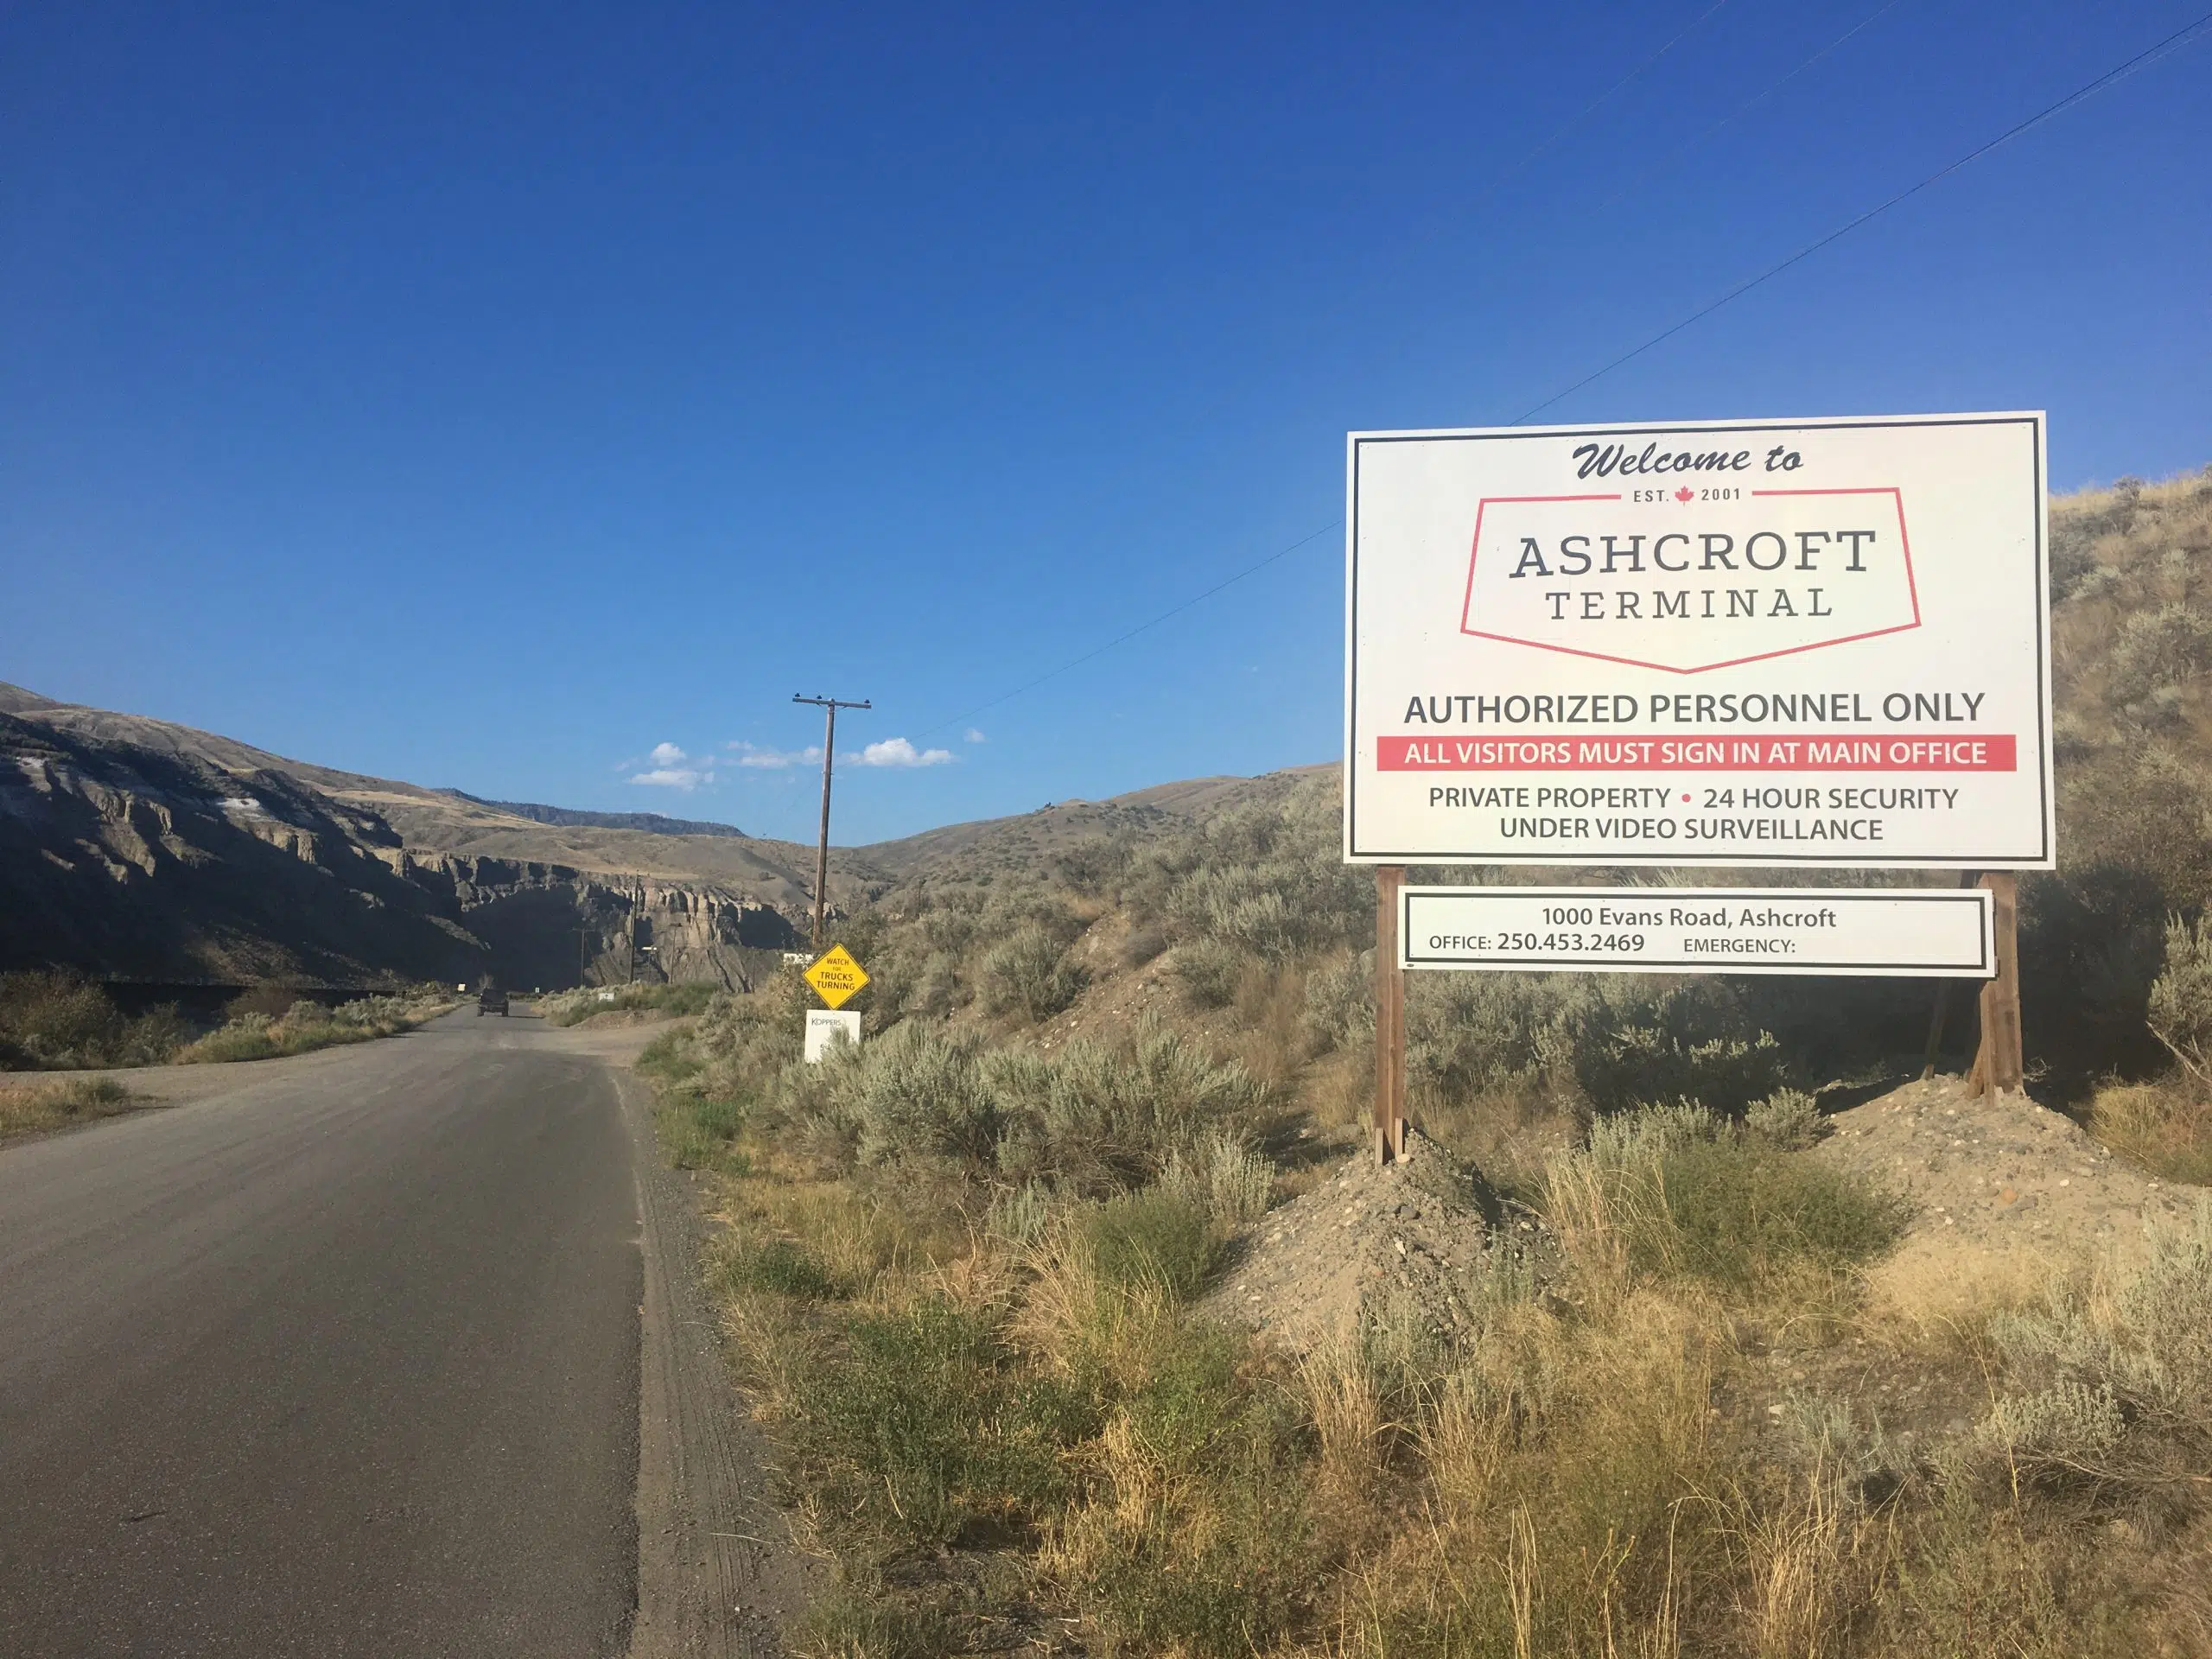 Ashcroft Terminal trying to find alternate recreation site, with Ashcroft Slough now off limits